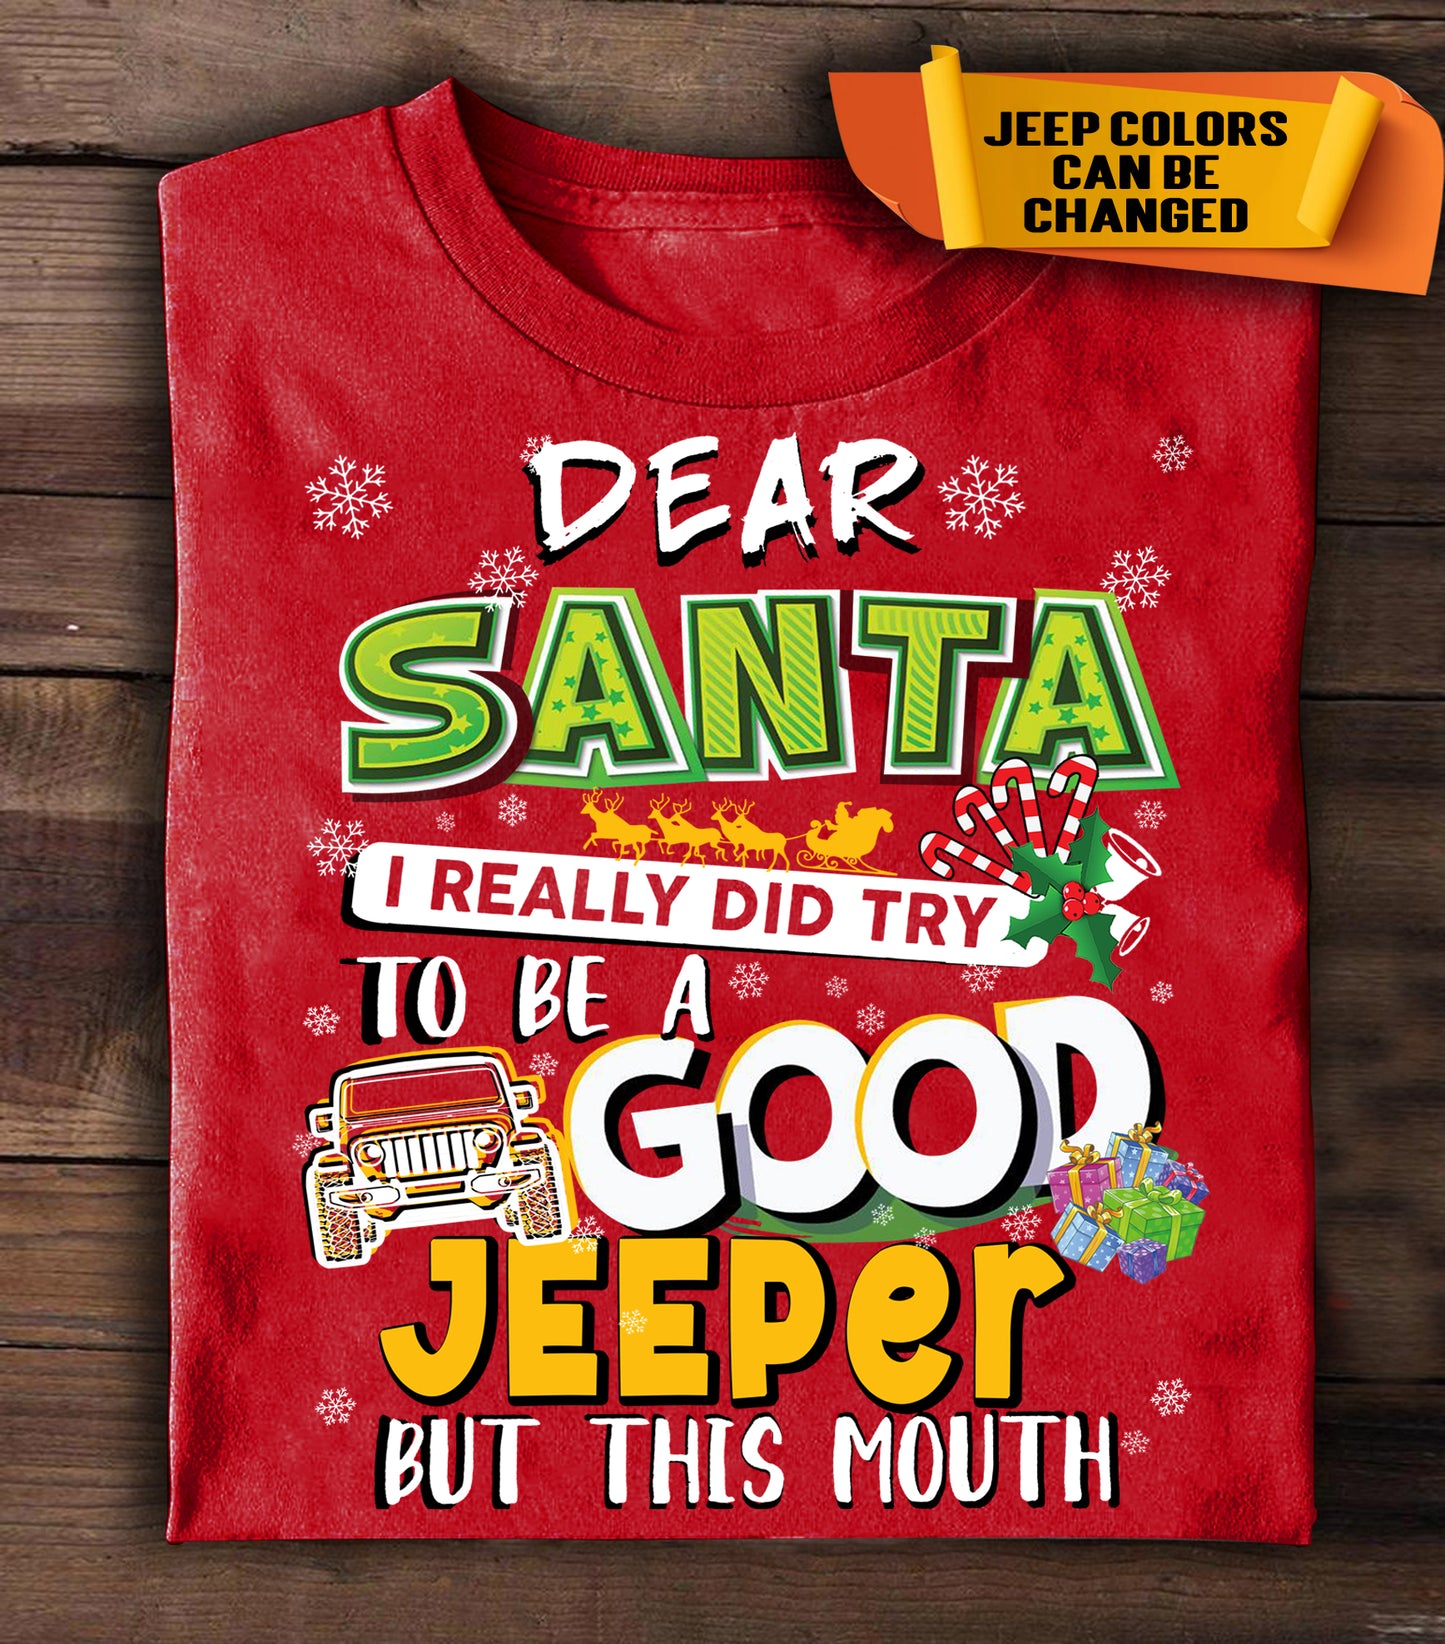 Dear Santa I really did try good jeeper but this mouth